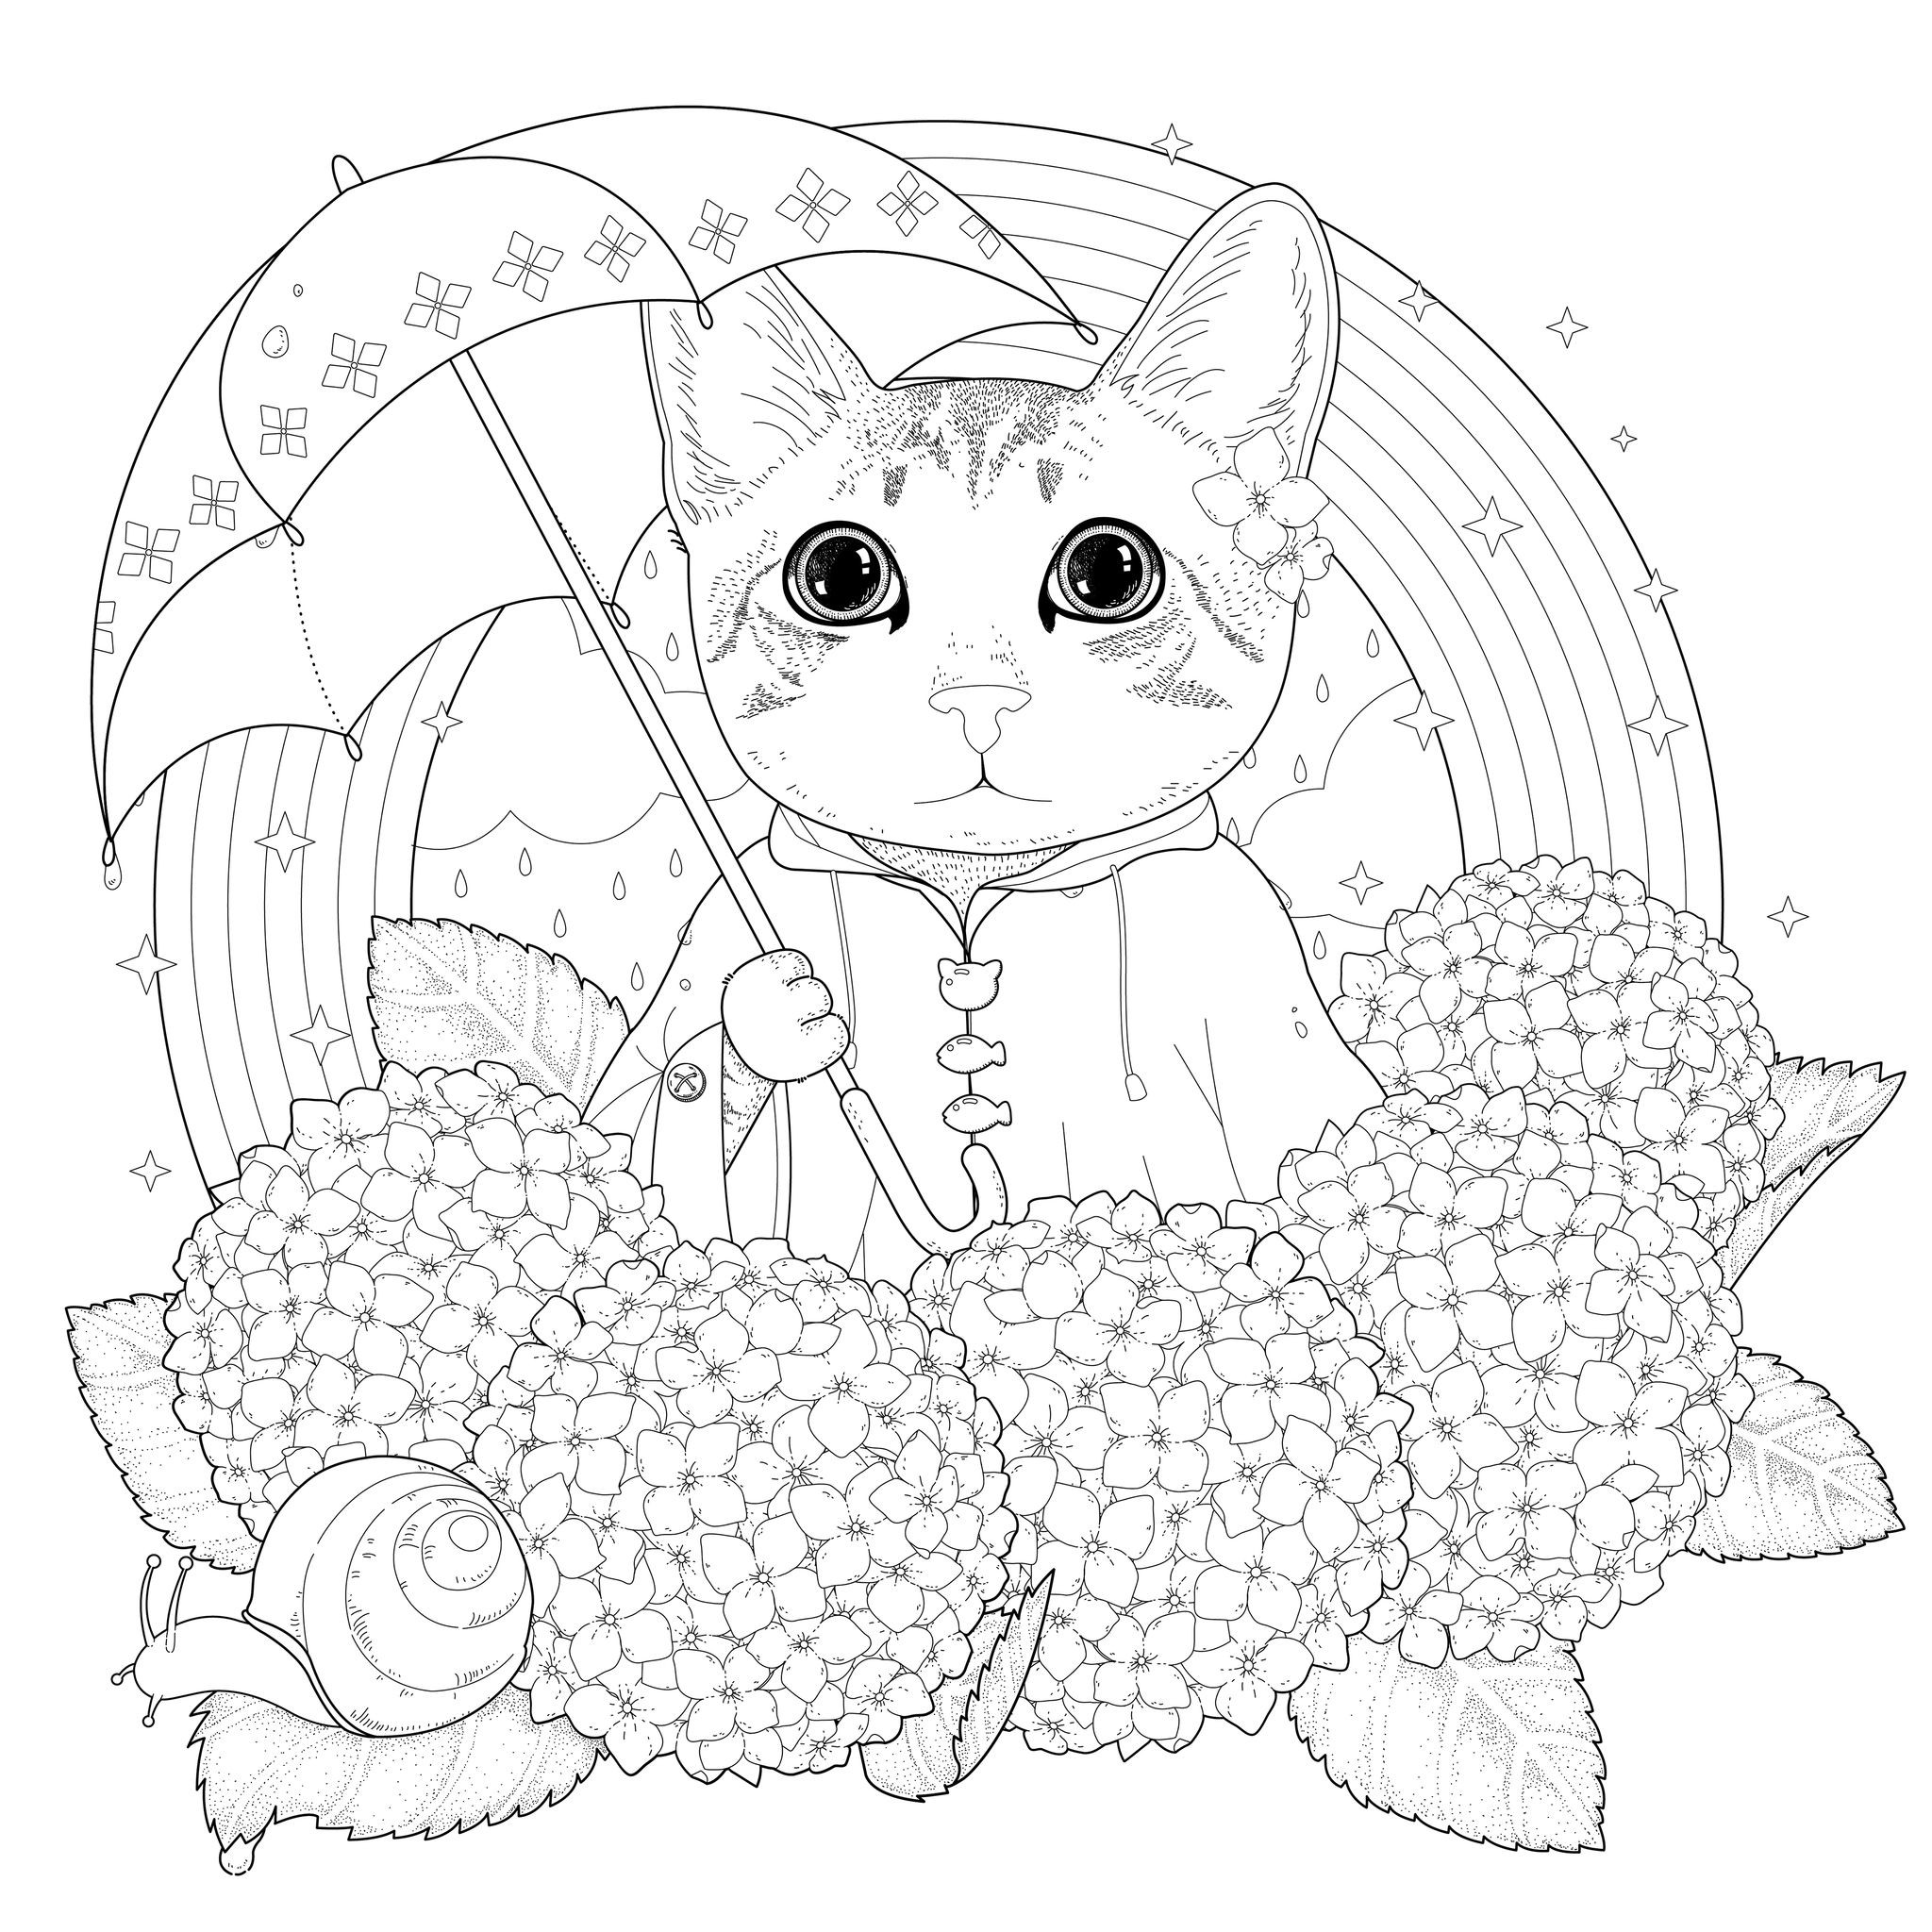 Rainbow Coloring Pages For Adults
 Pages cat rainbow mandala by kchung